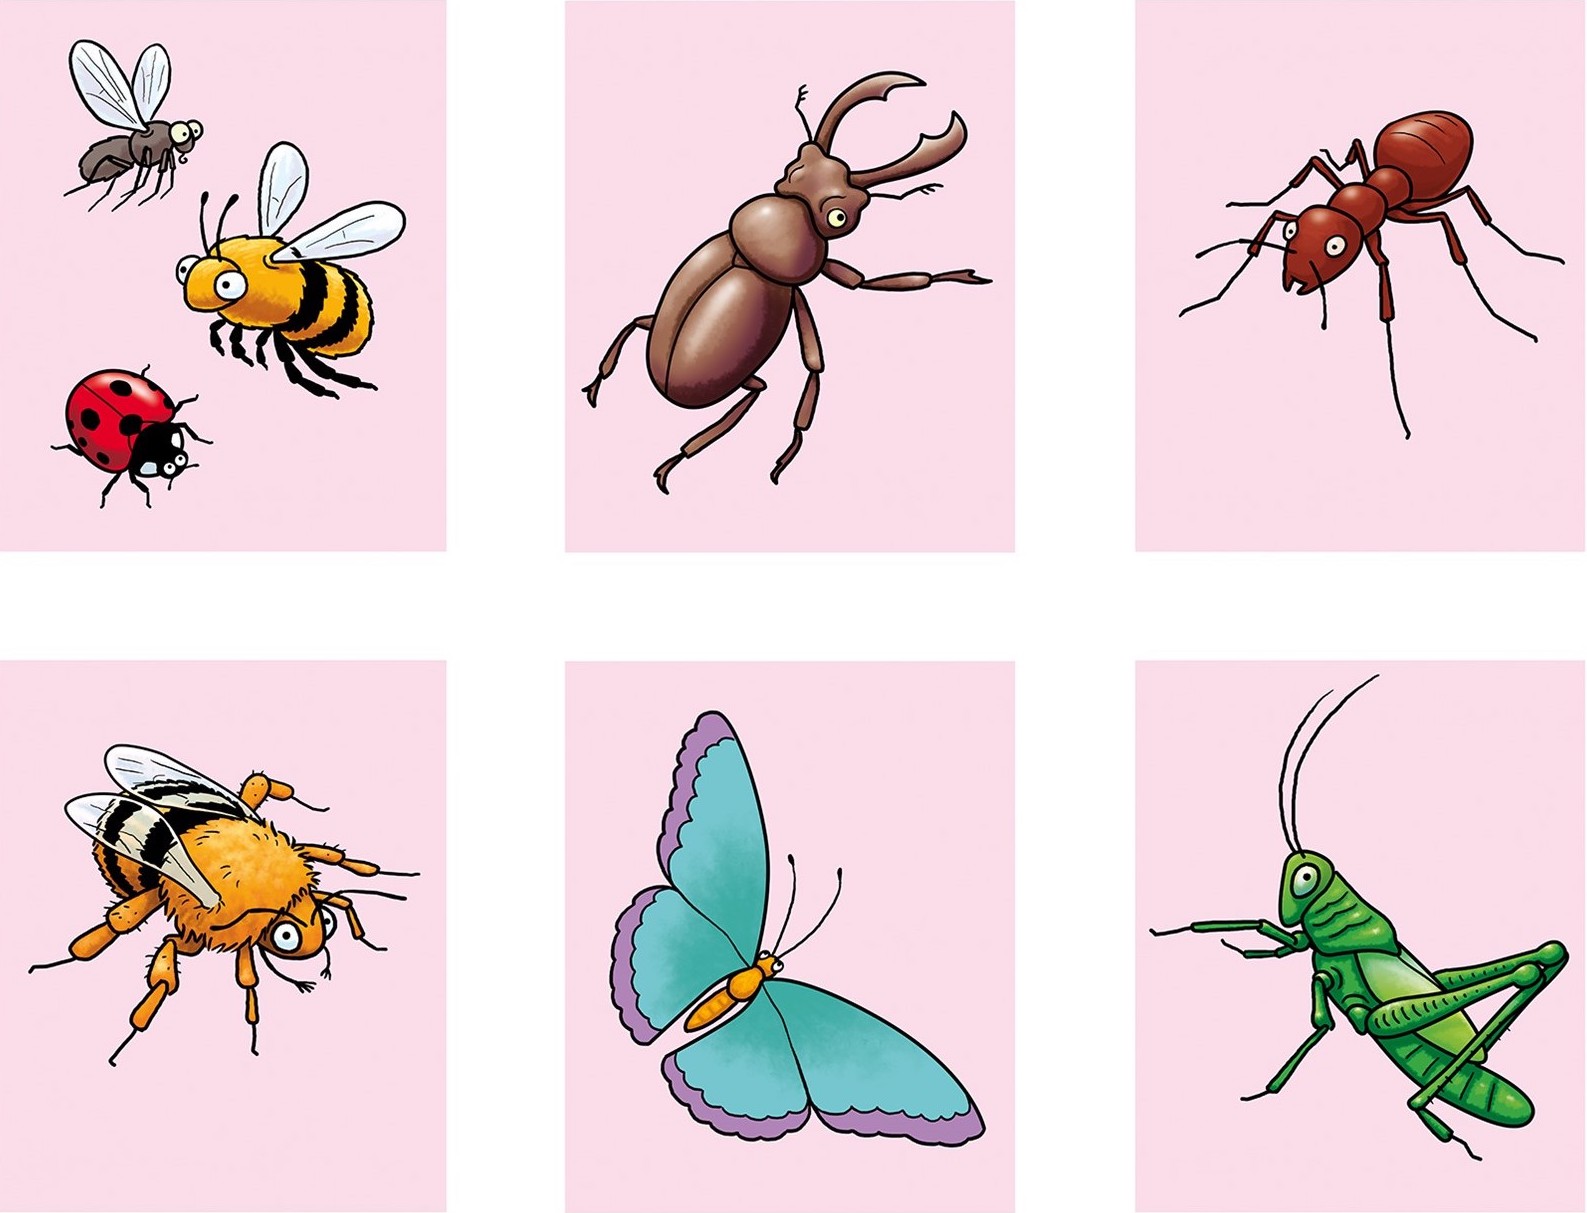 Robin Davies Illustration of bugs and insects